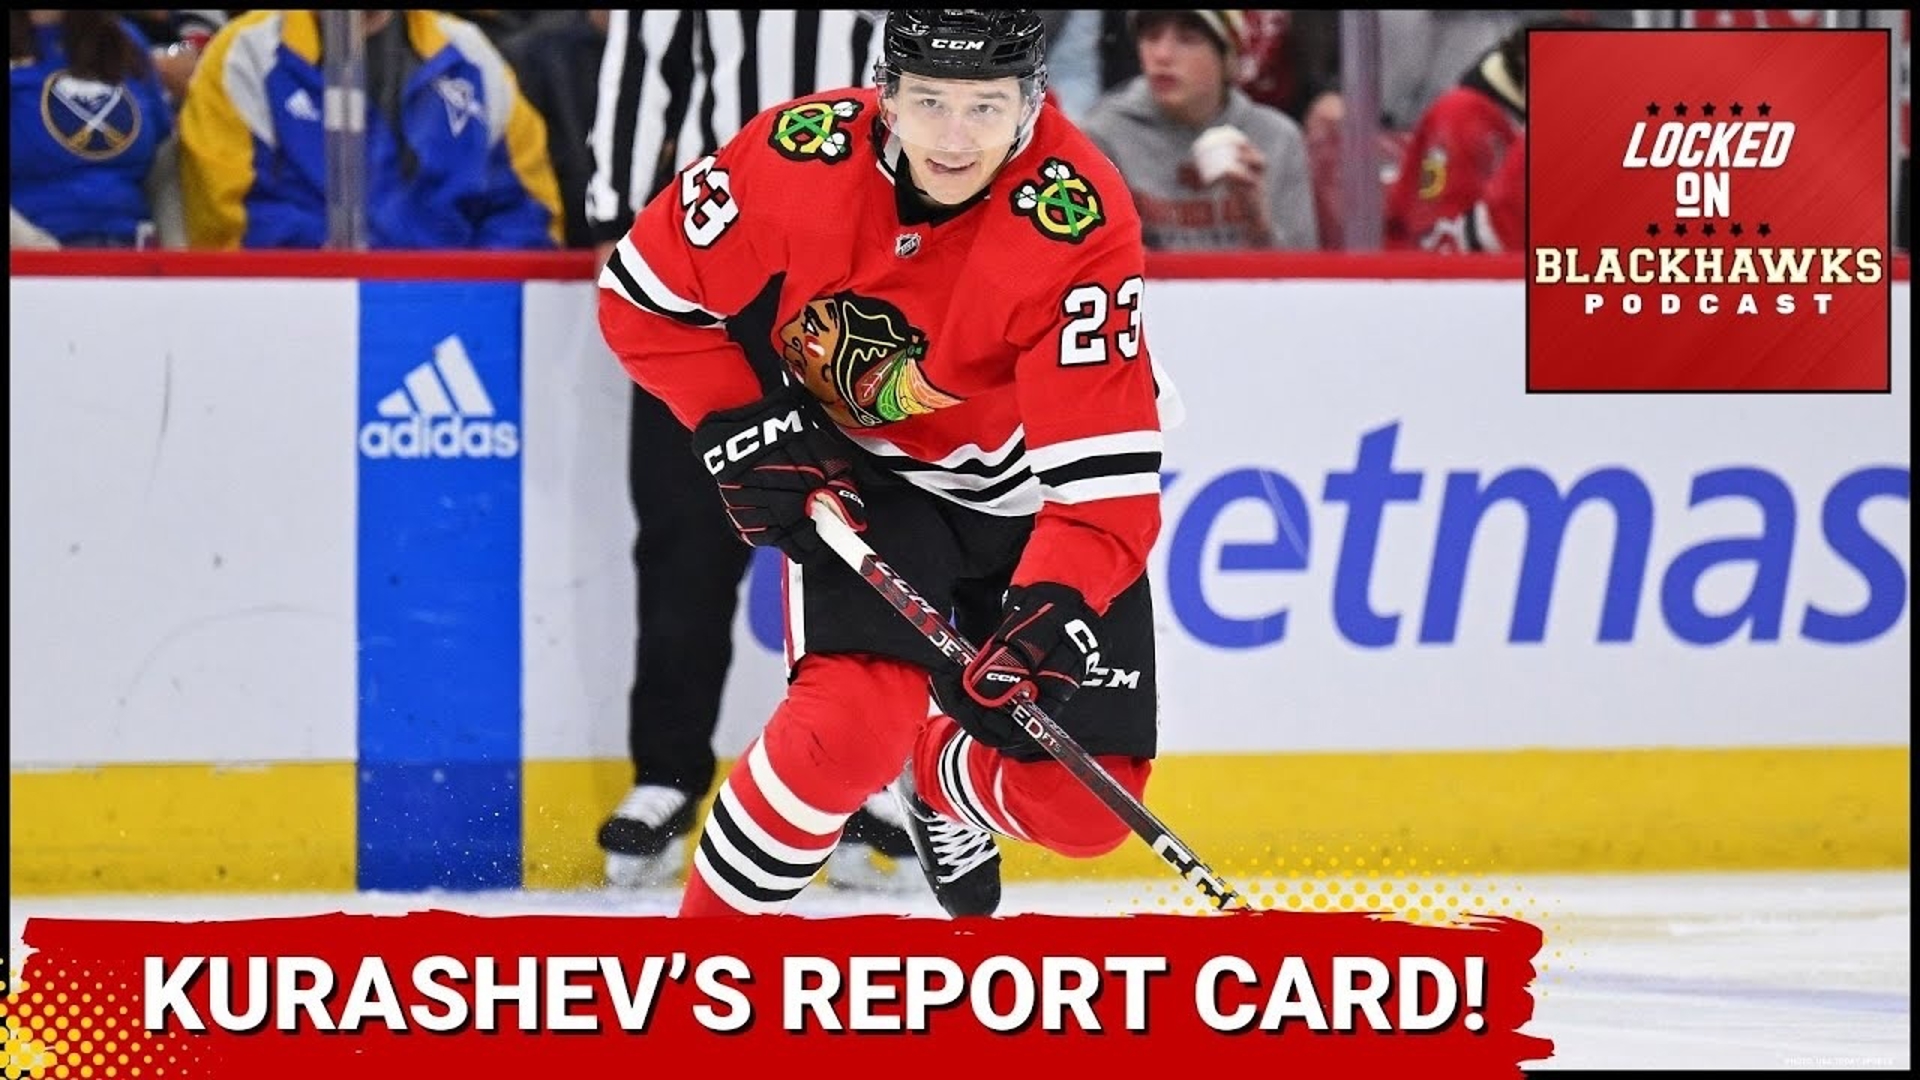 Monday's episode begins with Philipp Kurashev's 2023-24 Report Card! Host Jack Bushman dishes out a grade for Kurashev's performance this season.